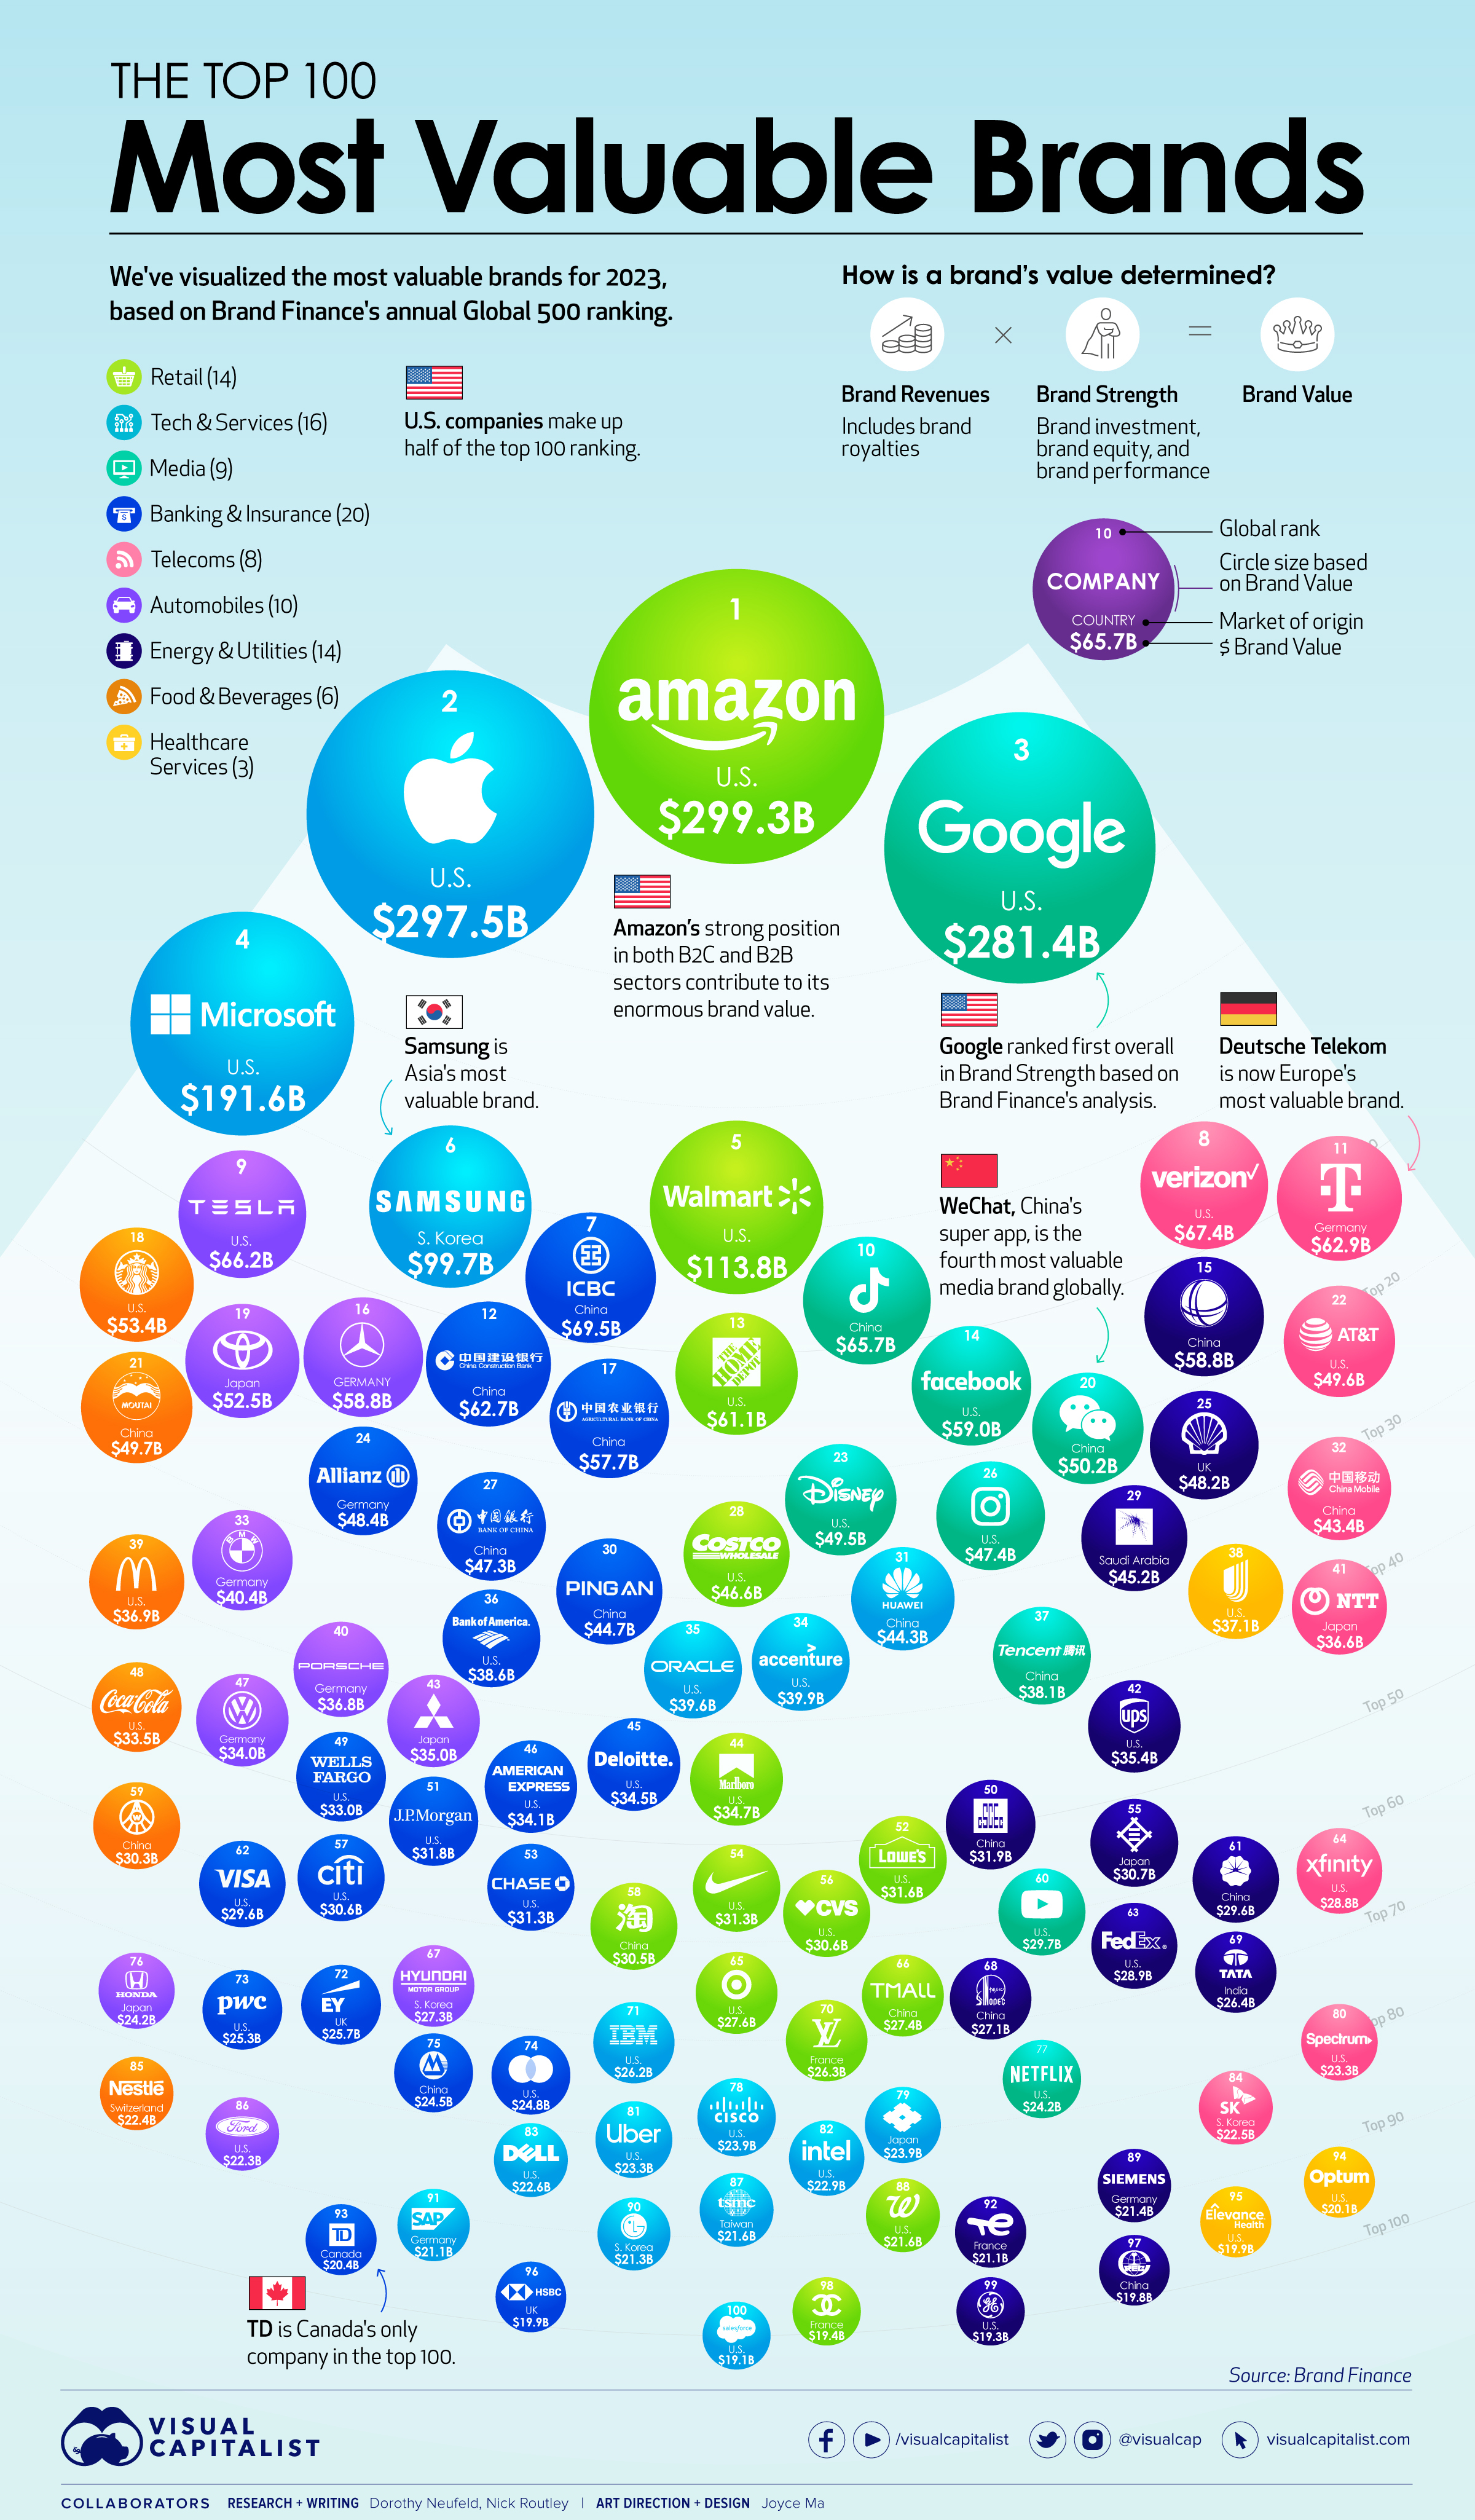 The Top 100 Brands by Value in 2023